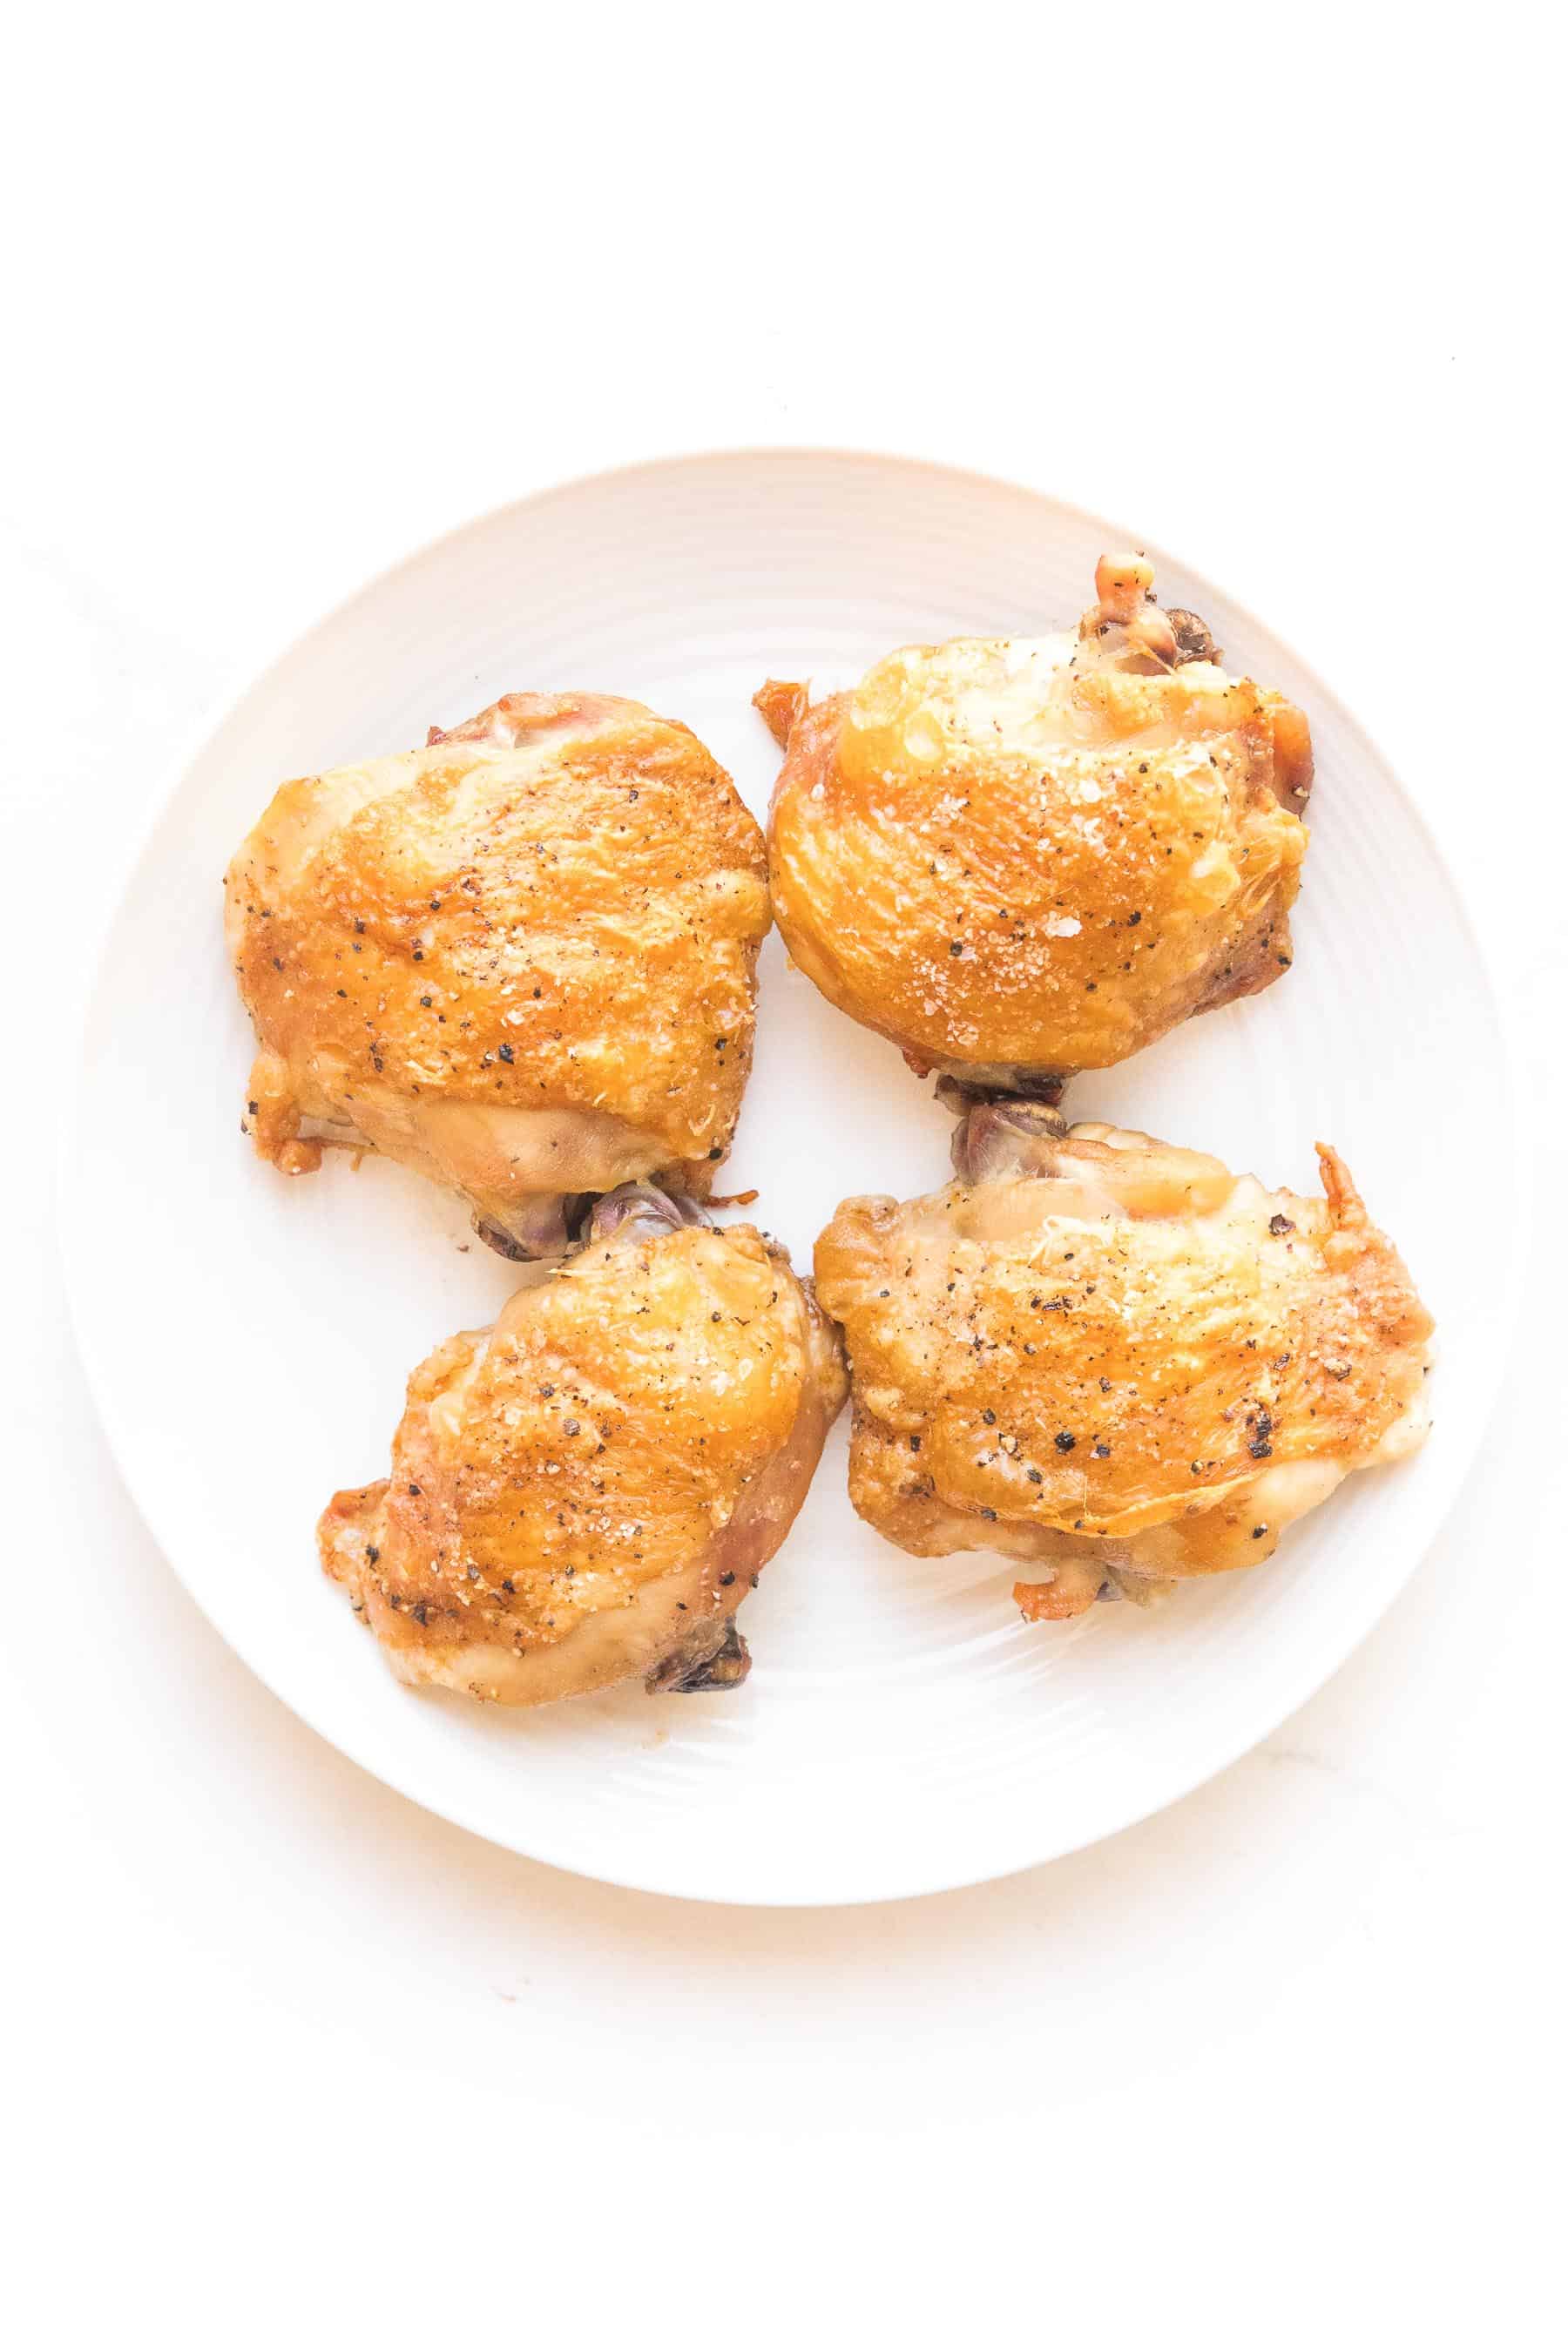 crispy golden brown chicken thighs on a white plate and white background